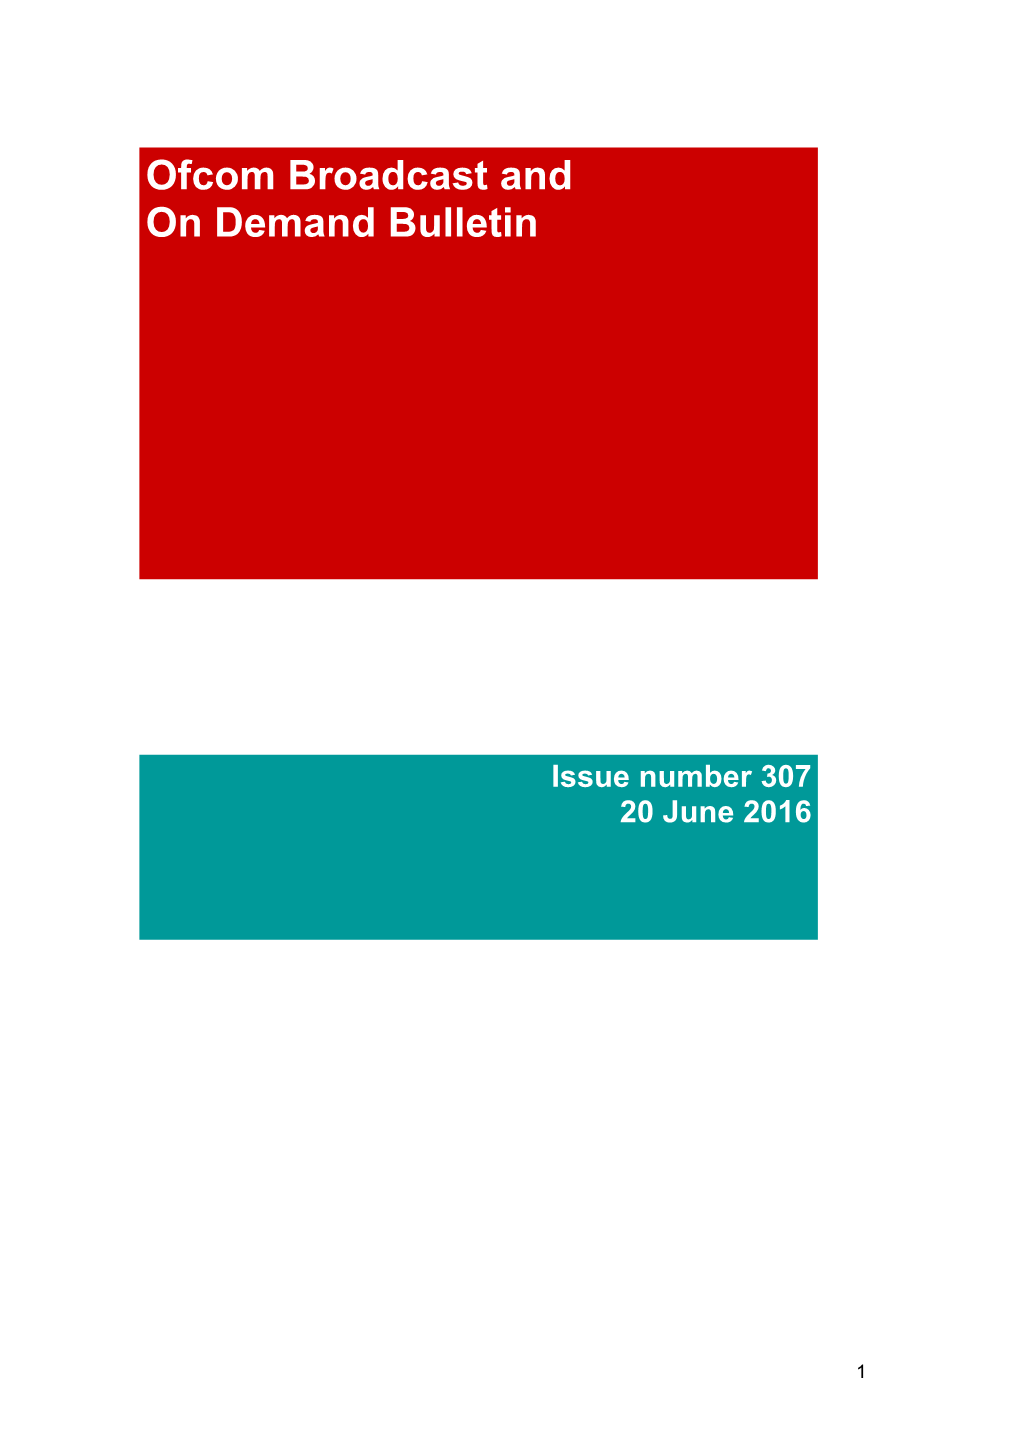 Broadcast and on Demand Bulletin Issue Number 307 20/06/16